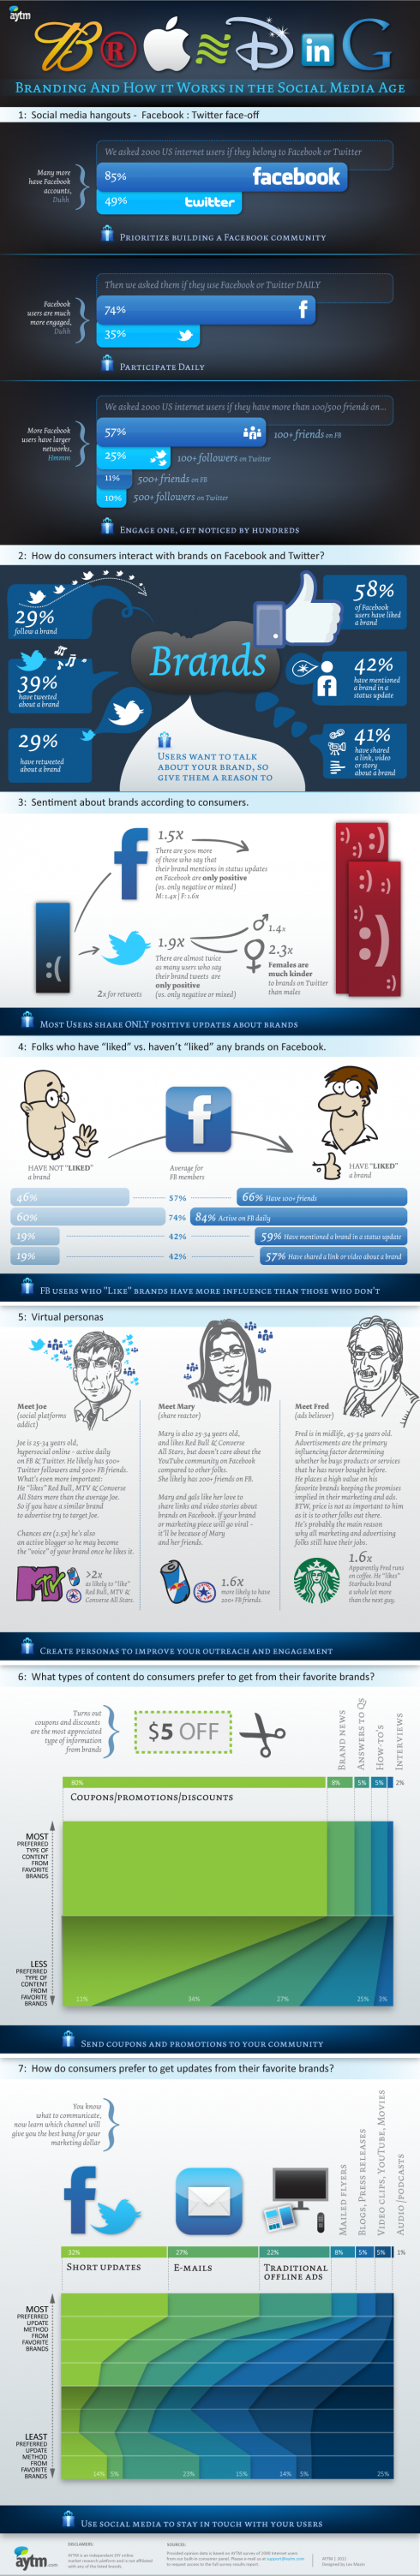 Branding And How It Works In The Social Media Age - Infographics